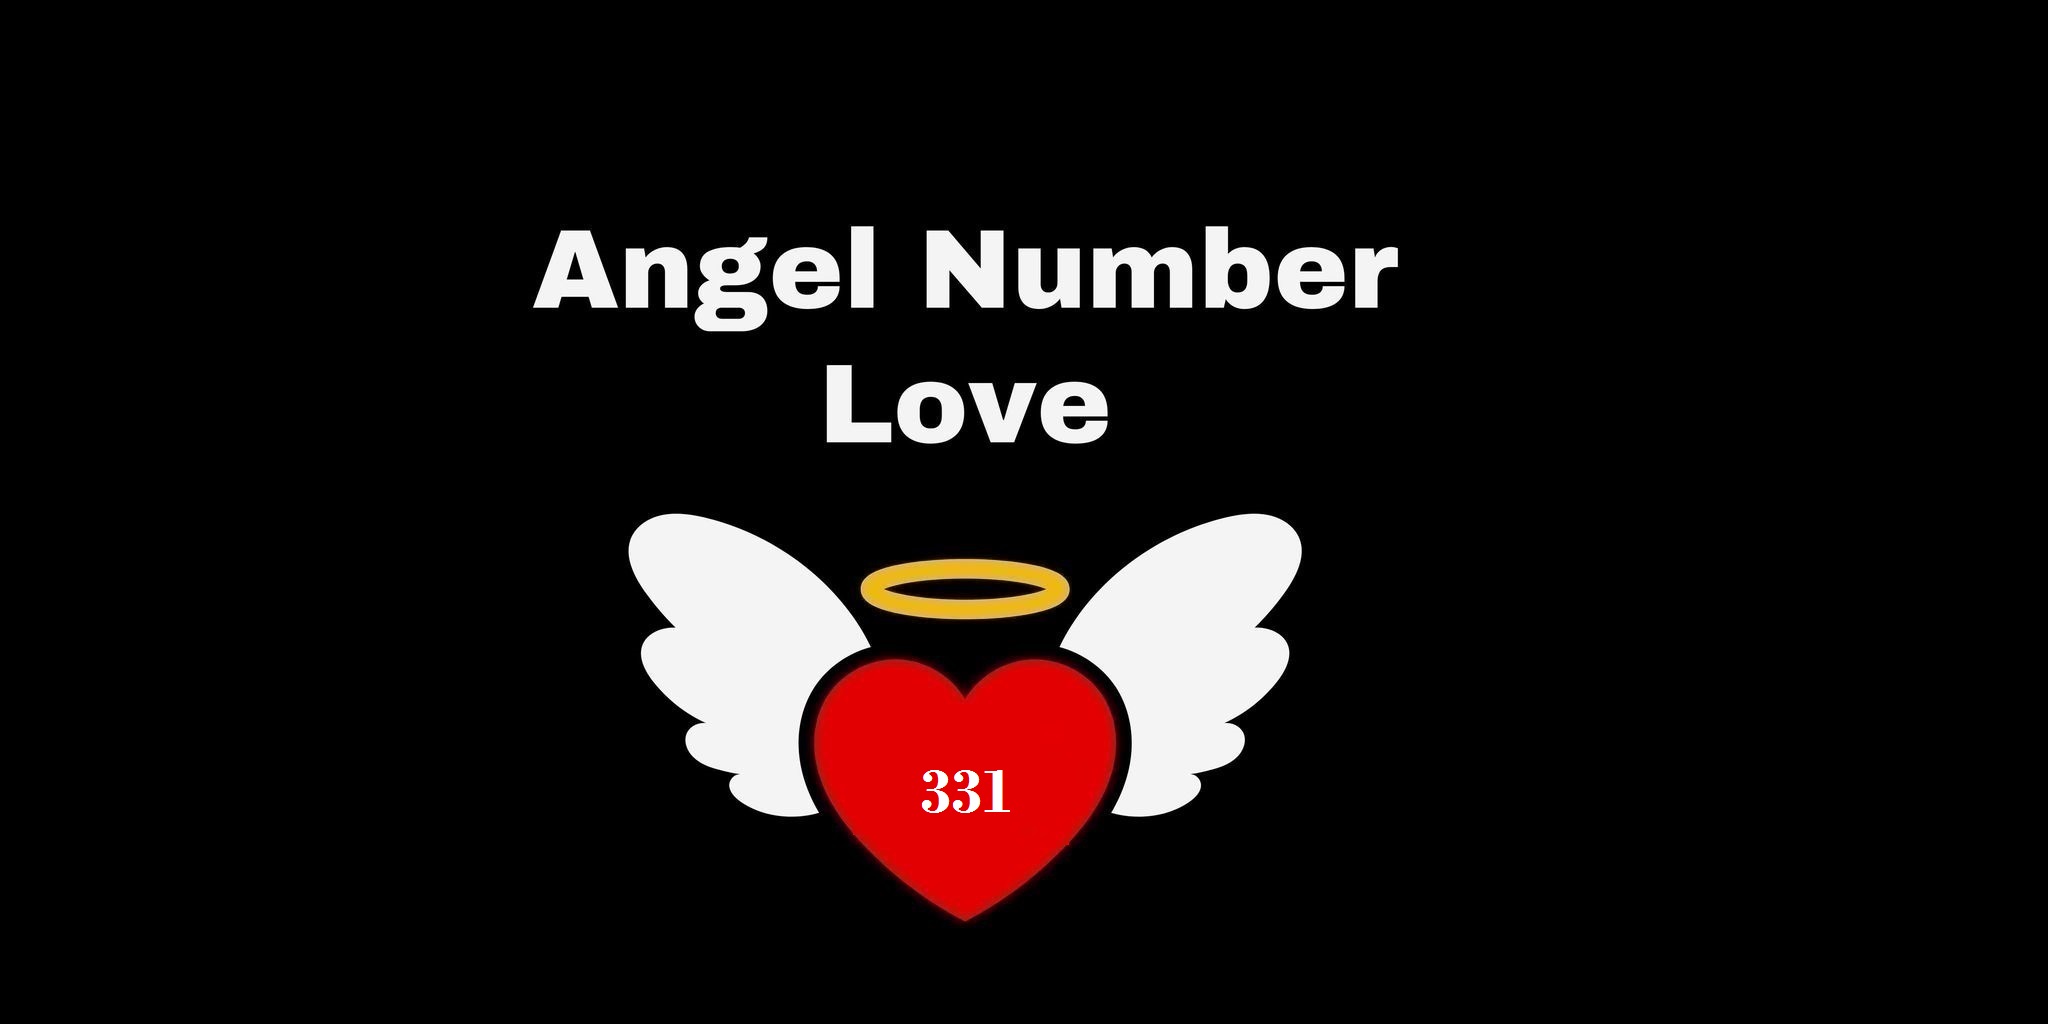 331 Angel Number Meaning In Love